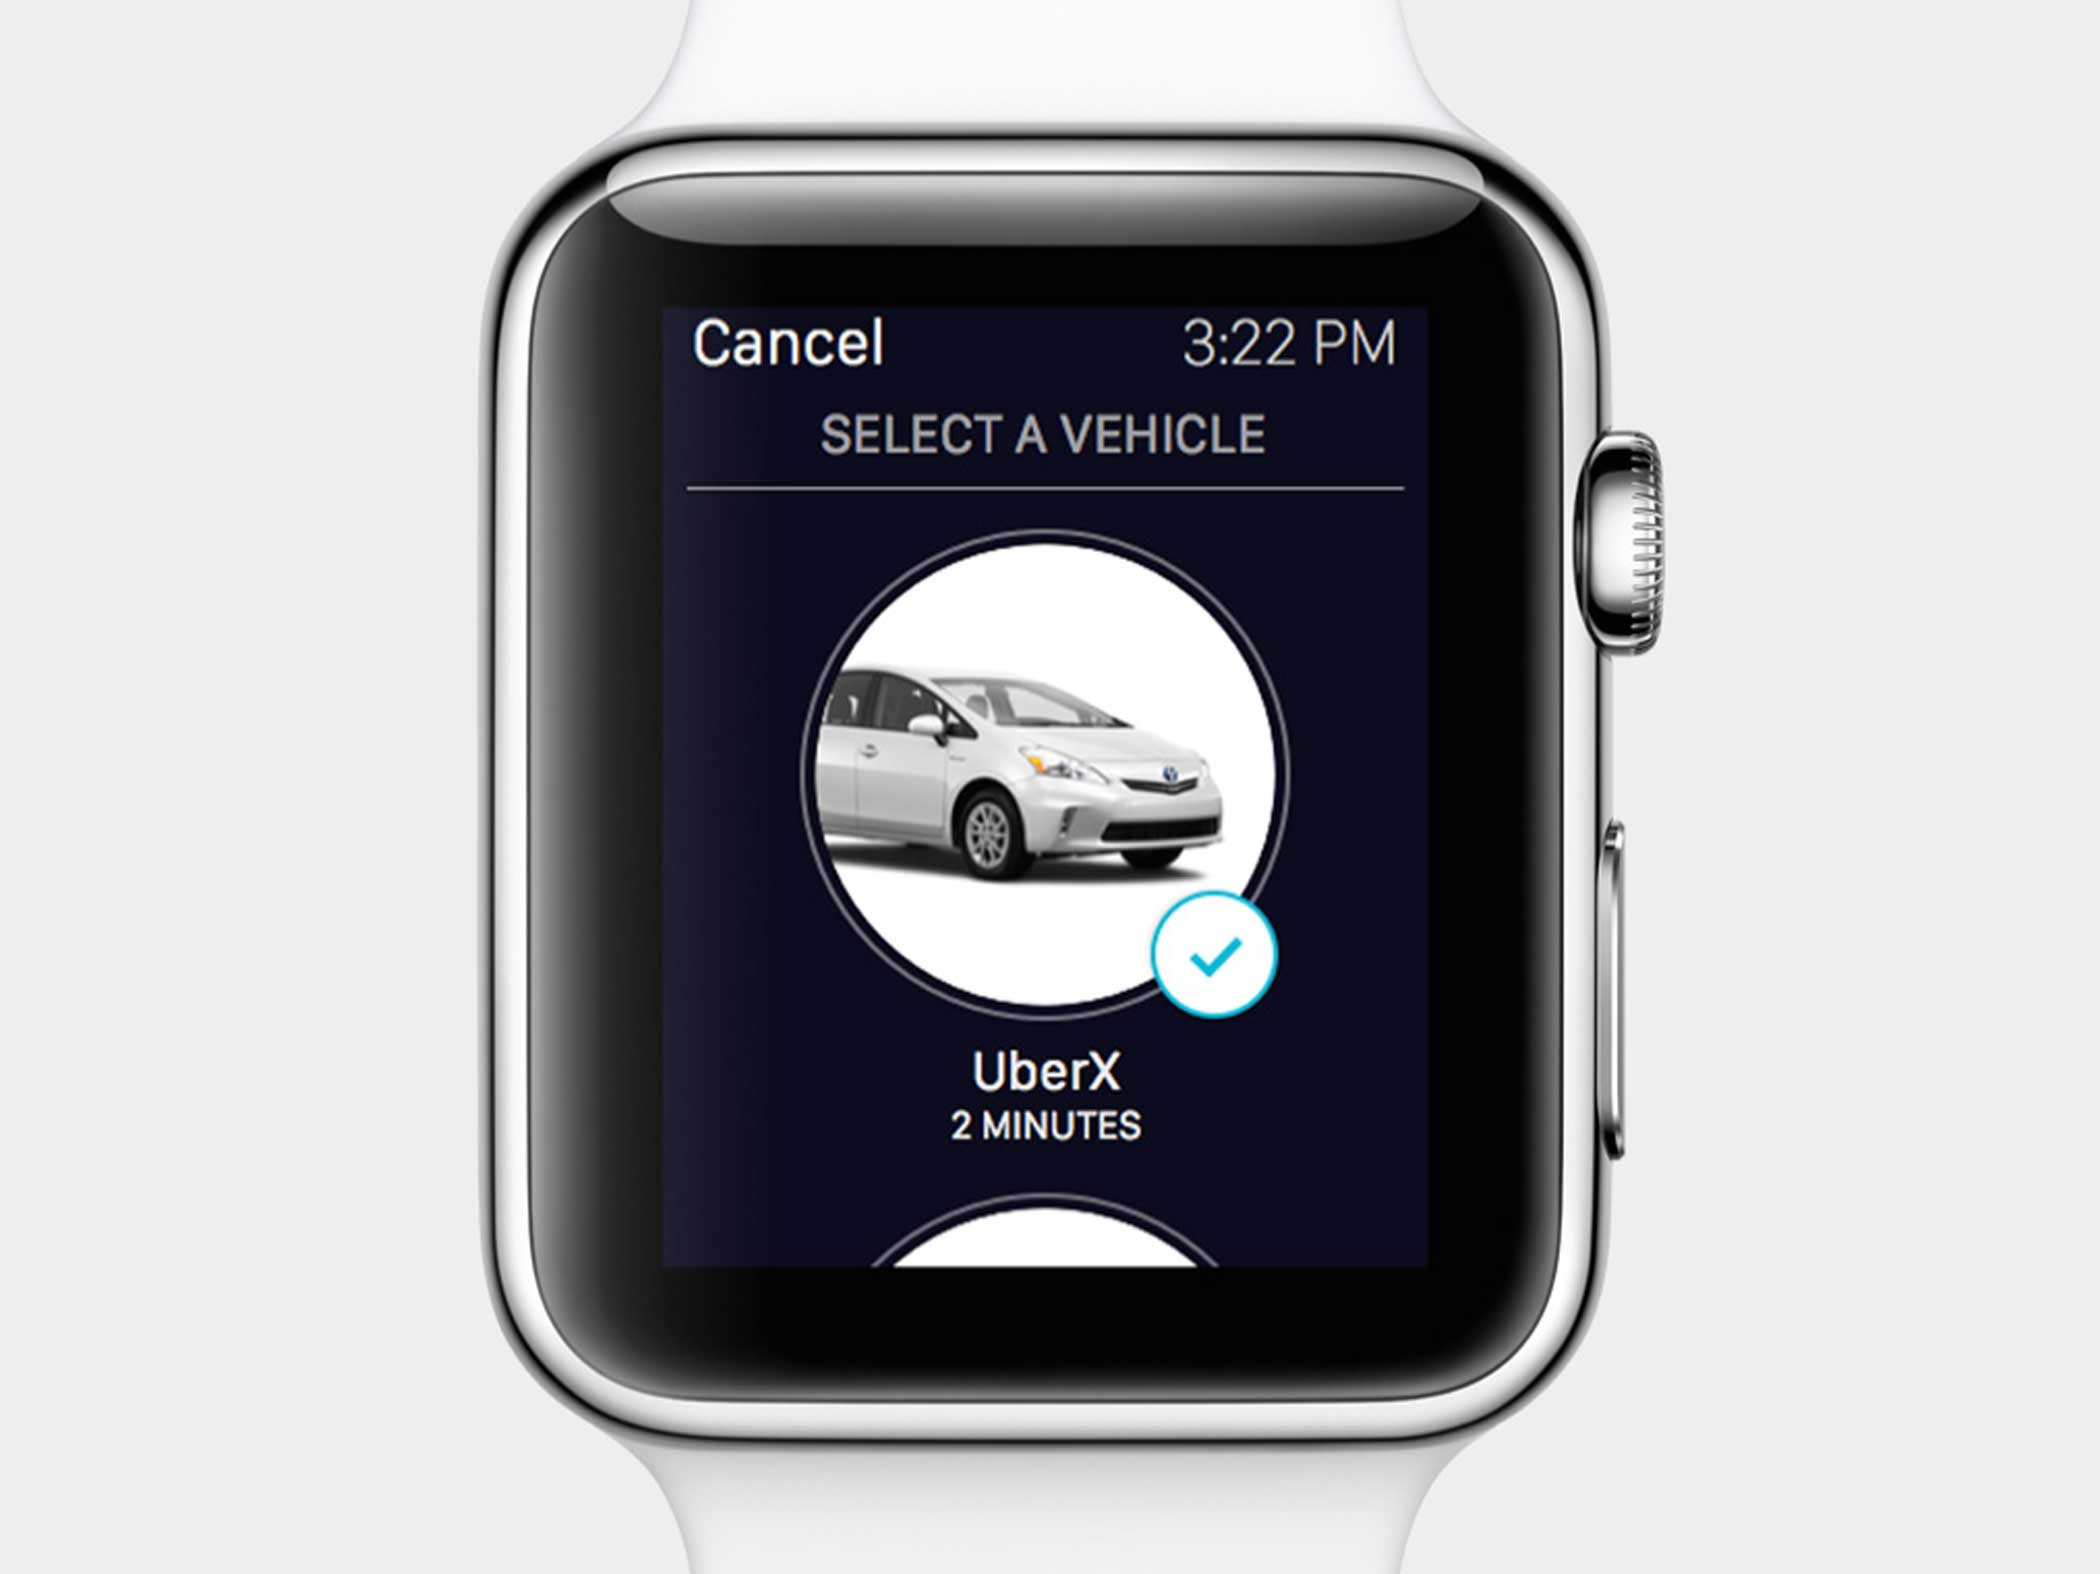 Request a ride on Uber with Apple Watch. Without reaching for your phone.